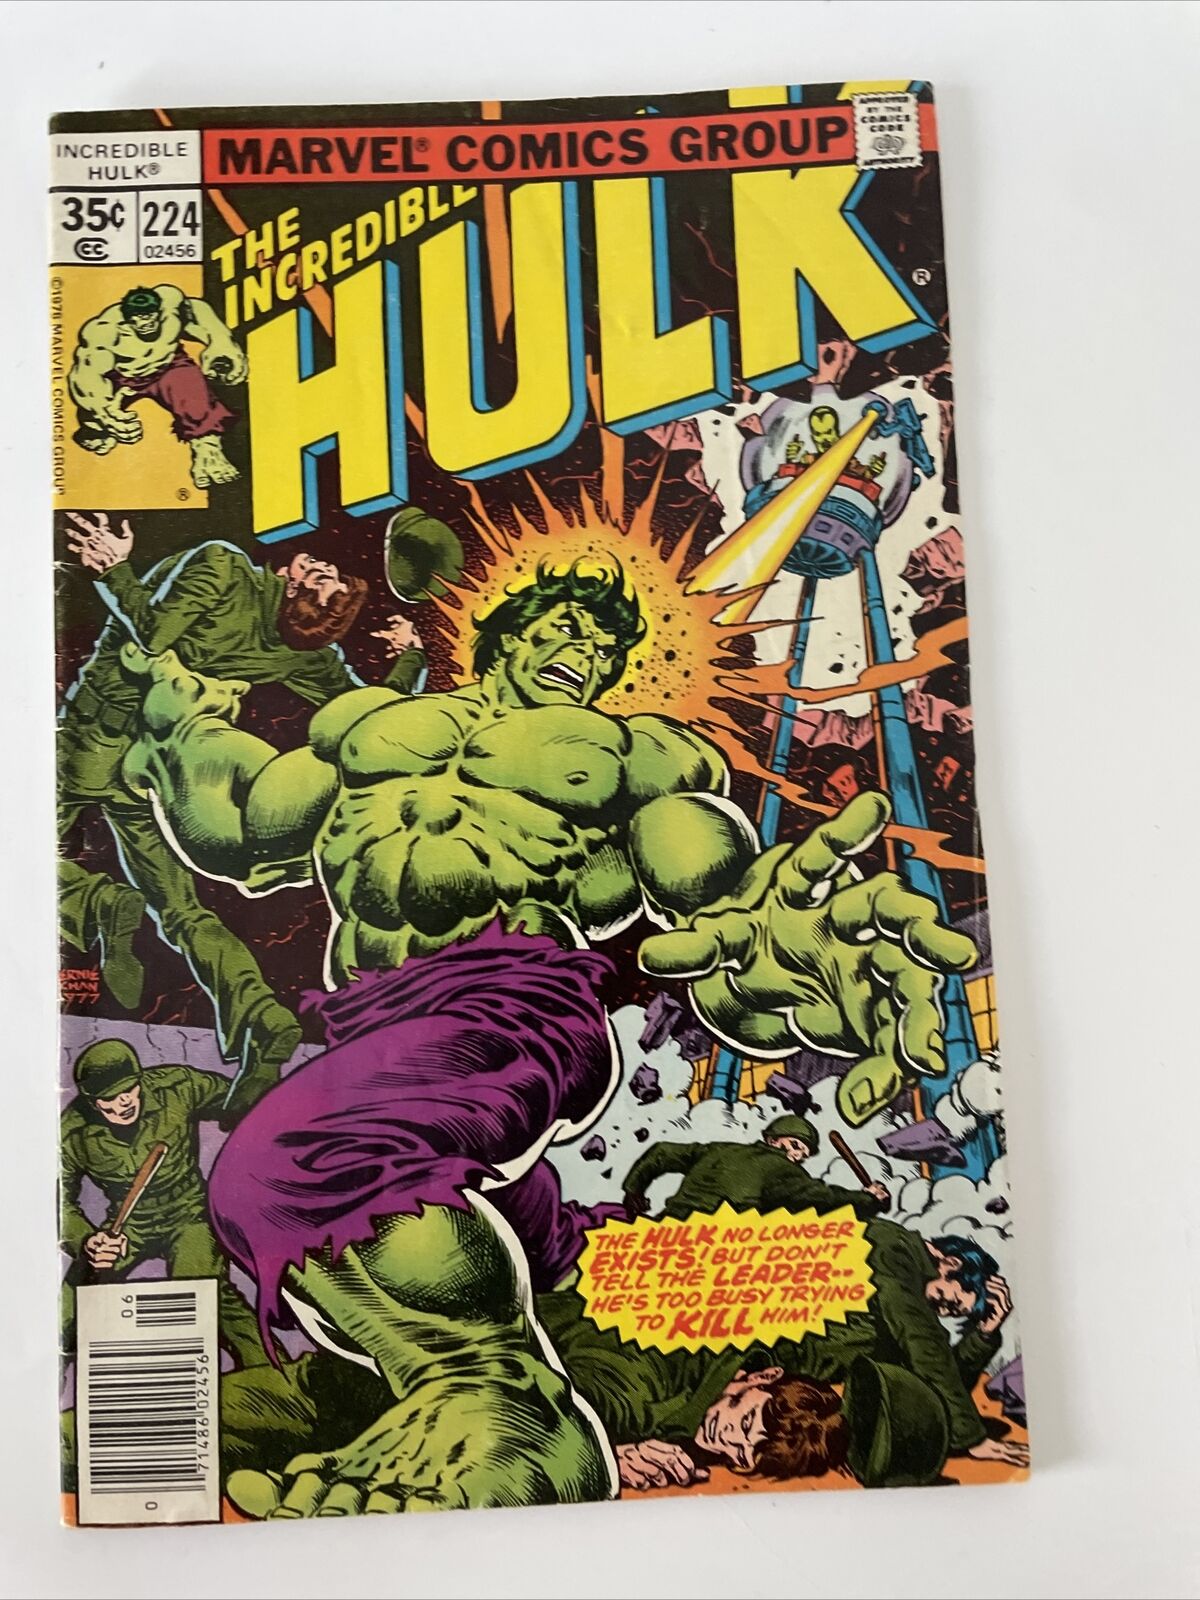 1978 Drakes Marvel The Incredible Hulk Covers Food Issue Vol 1 #224 June